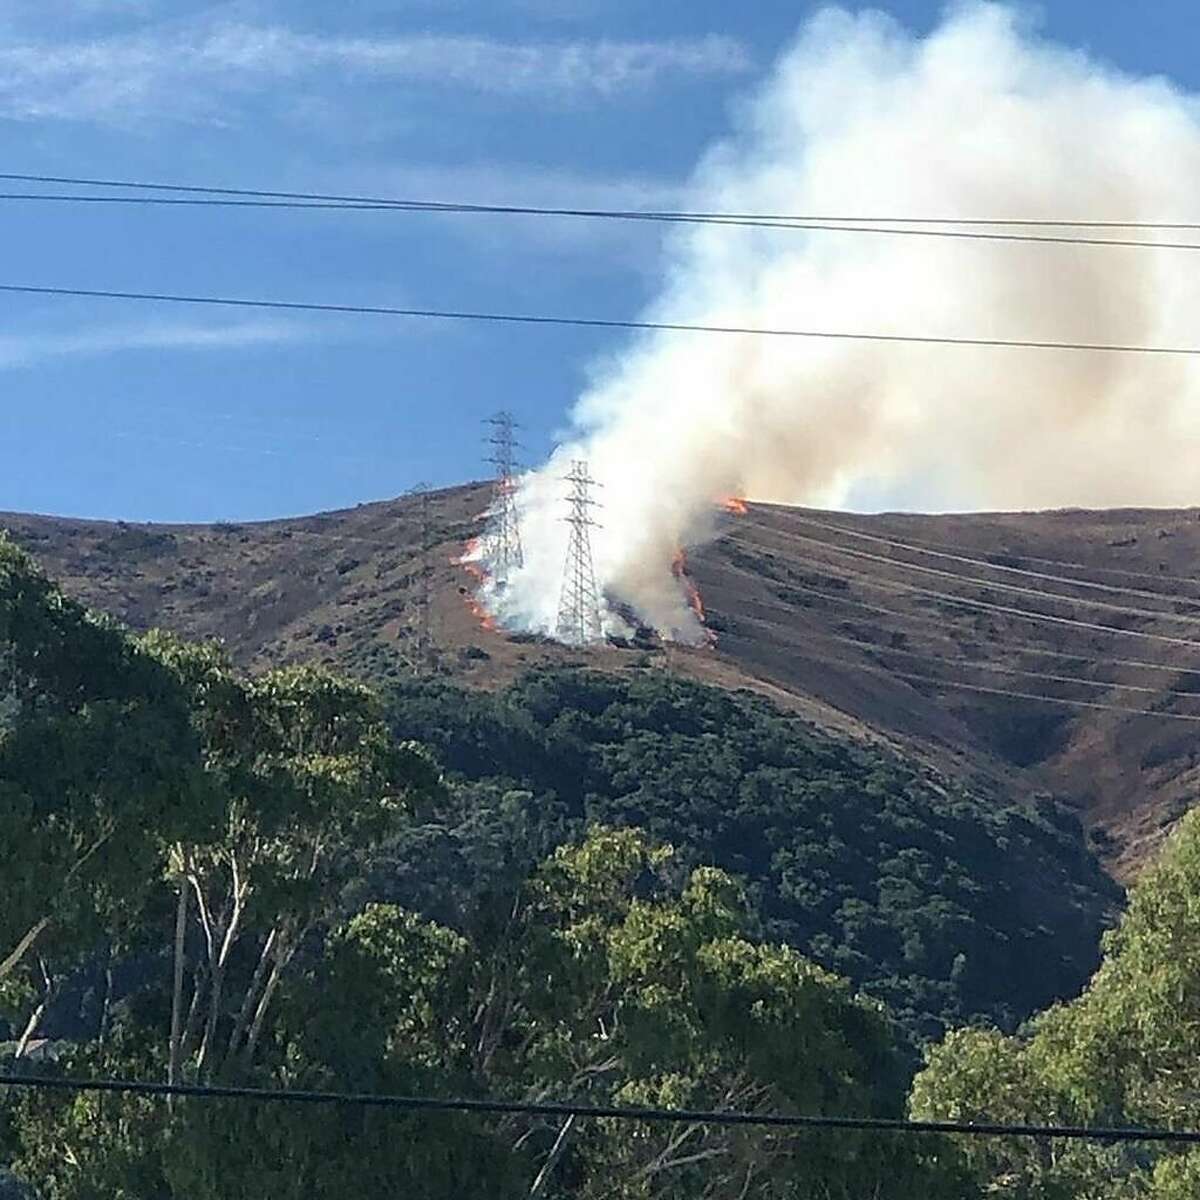 A vegetation fire on San Bruno Mountain in Brisbane started in Guadalupe Canyon, according to the Northern California Fire District.